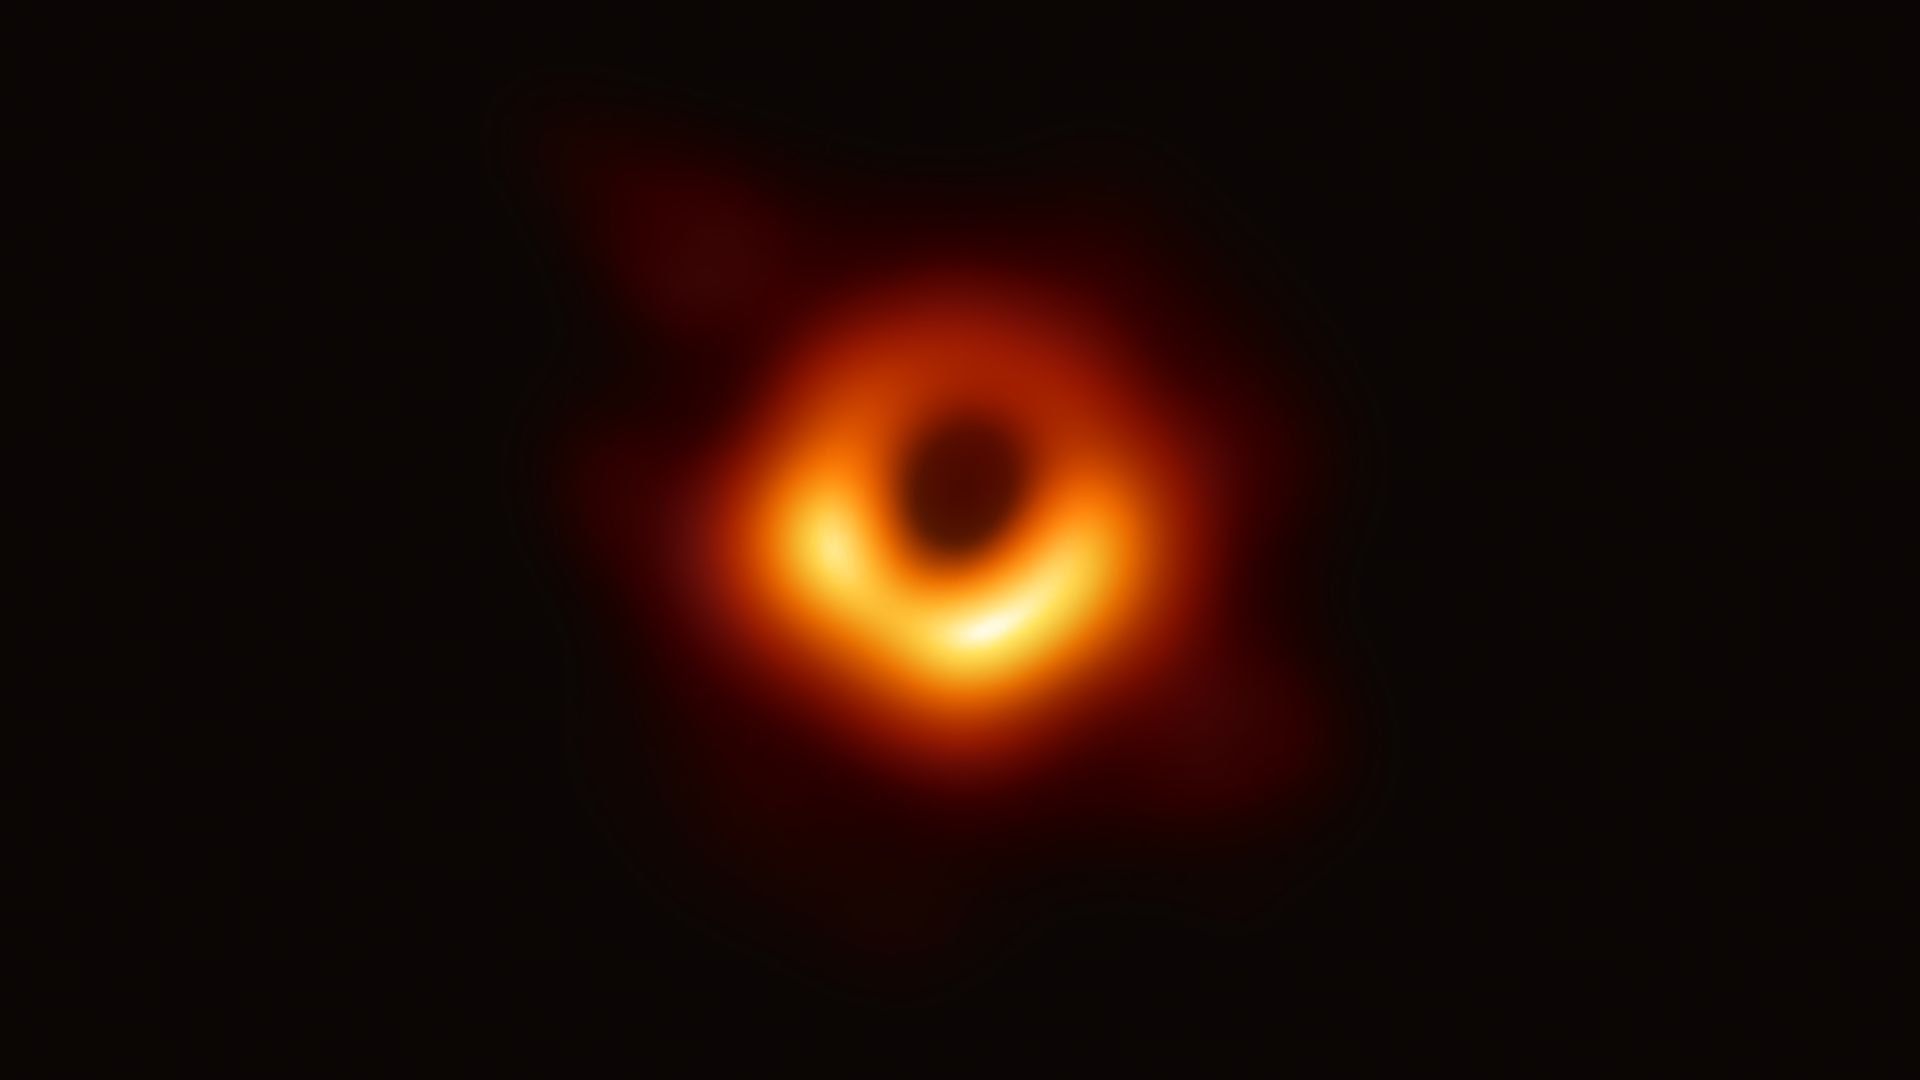 Image of a blackhole in space